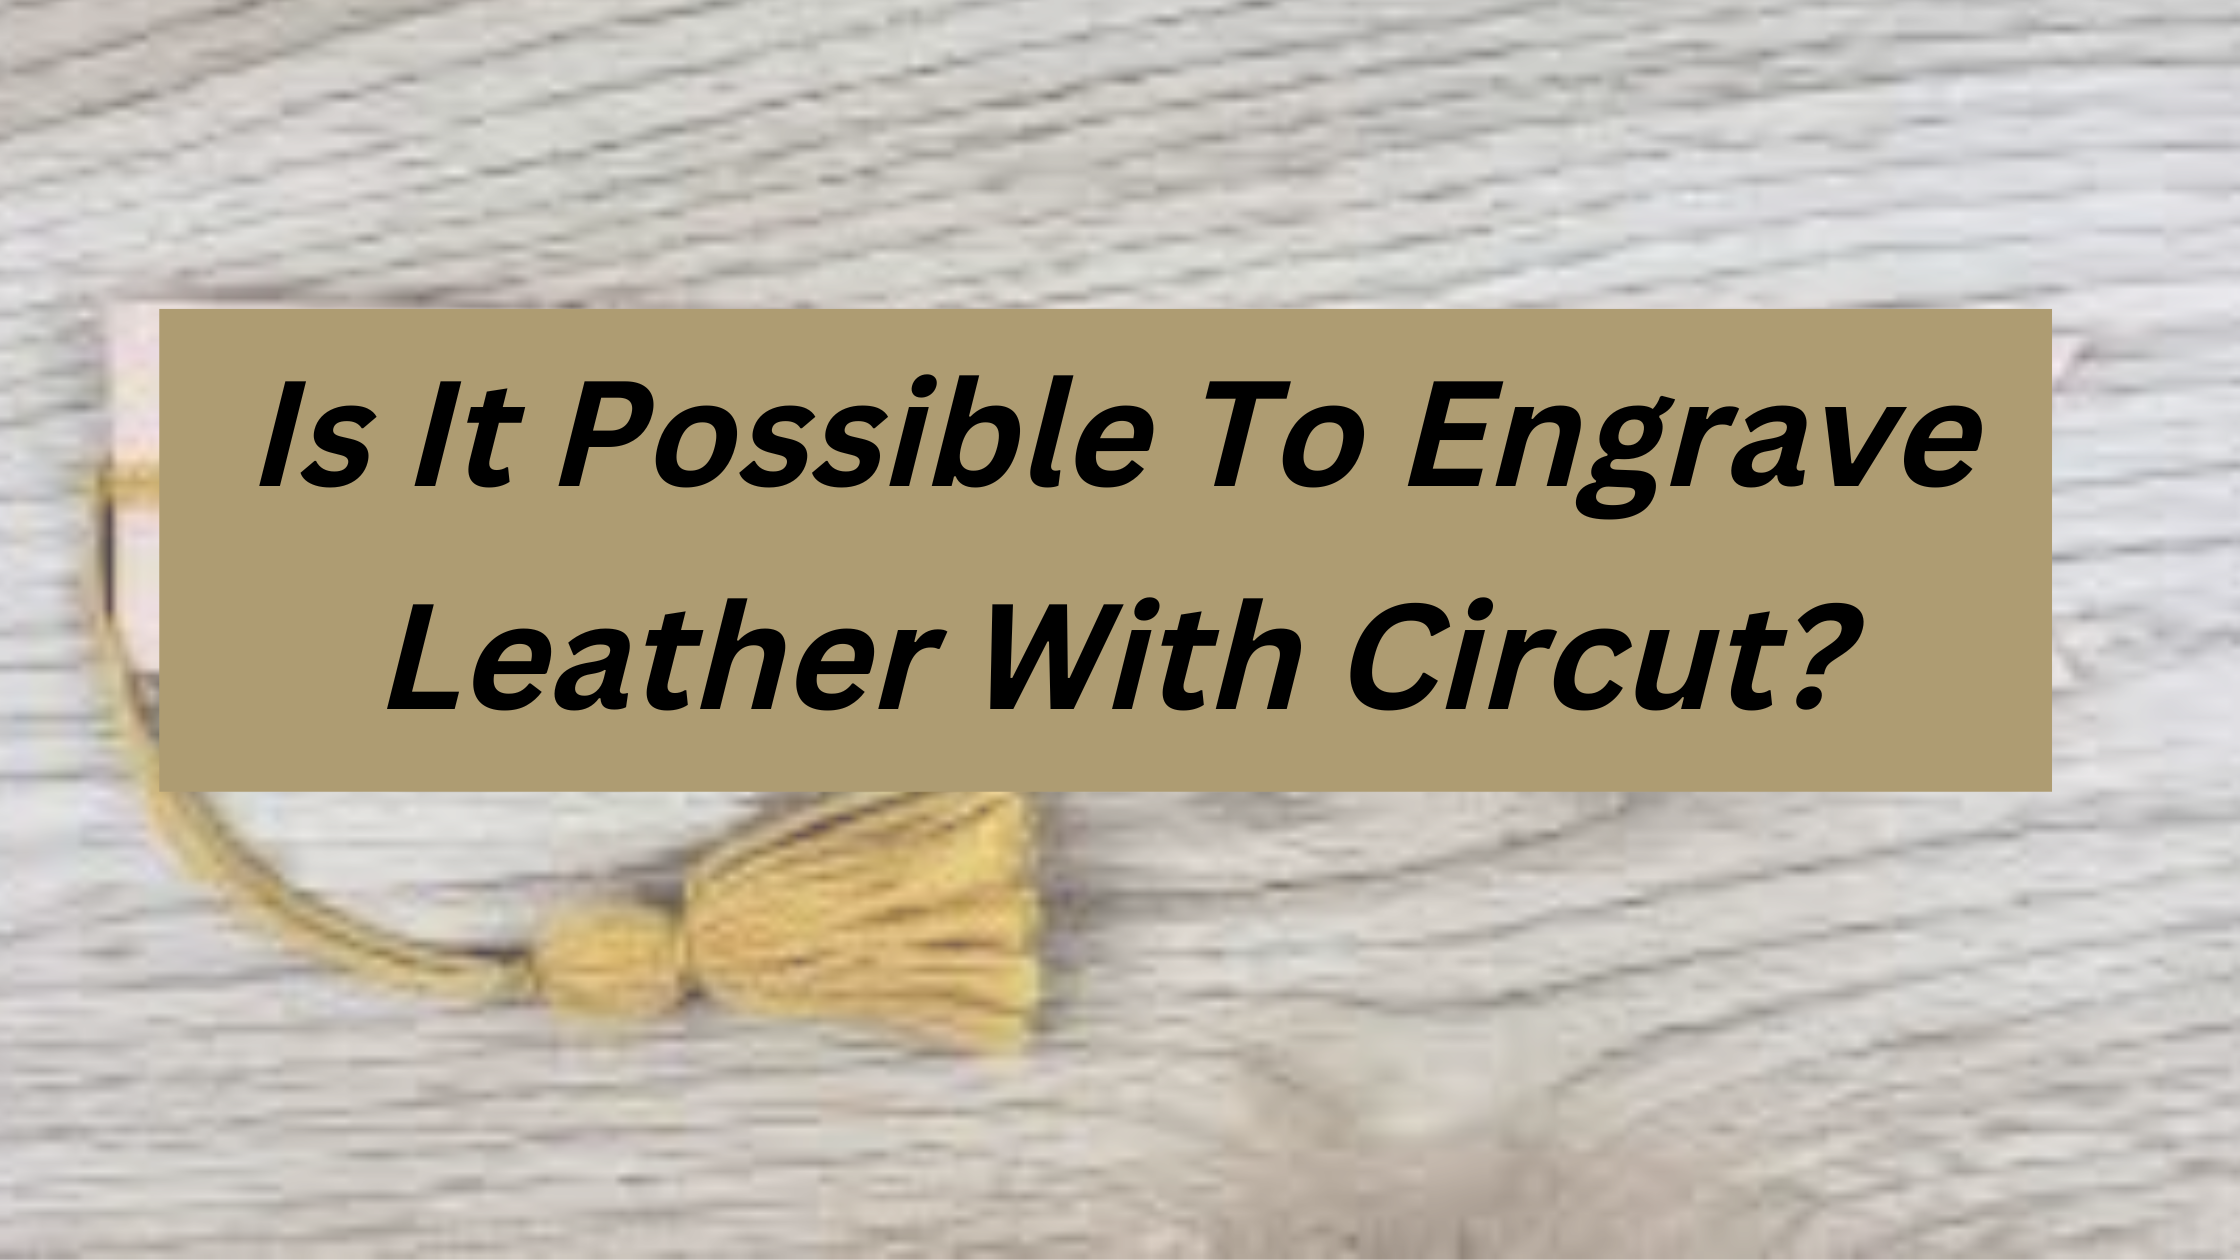 Is It Possible To Engrave Leather With Circut?